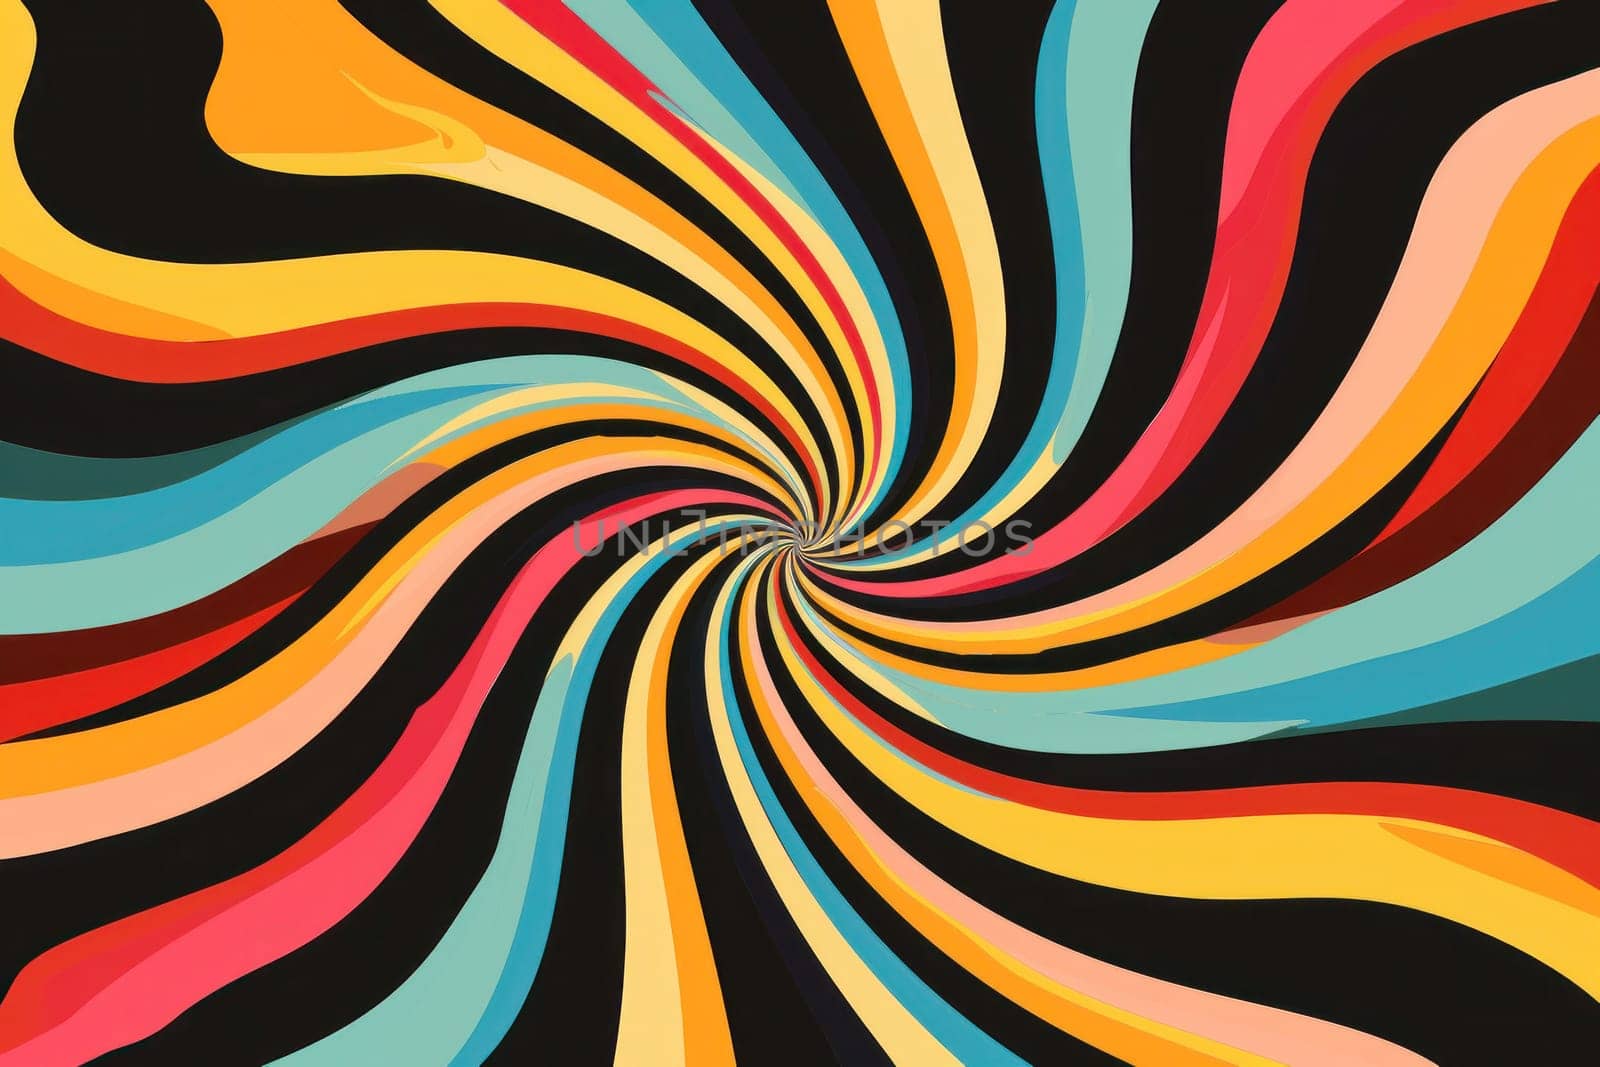 Colorful swirls and lines abstract background on black vibrant illustration with artistic flair and energetic movement